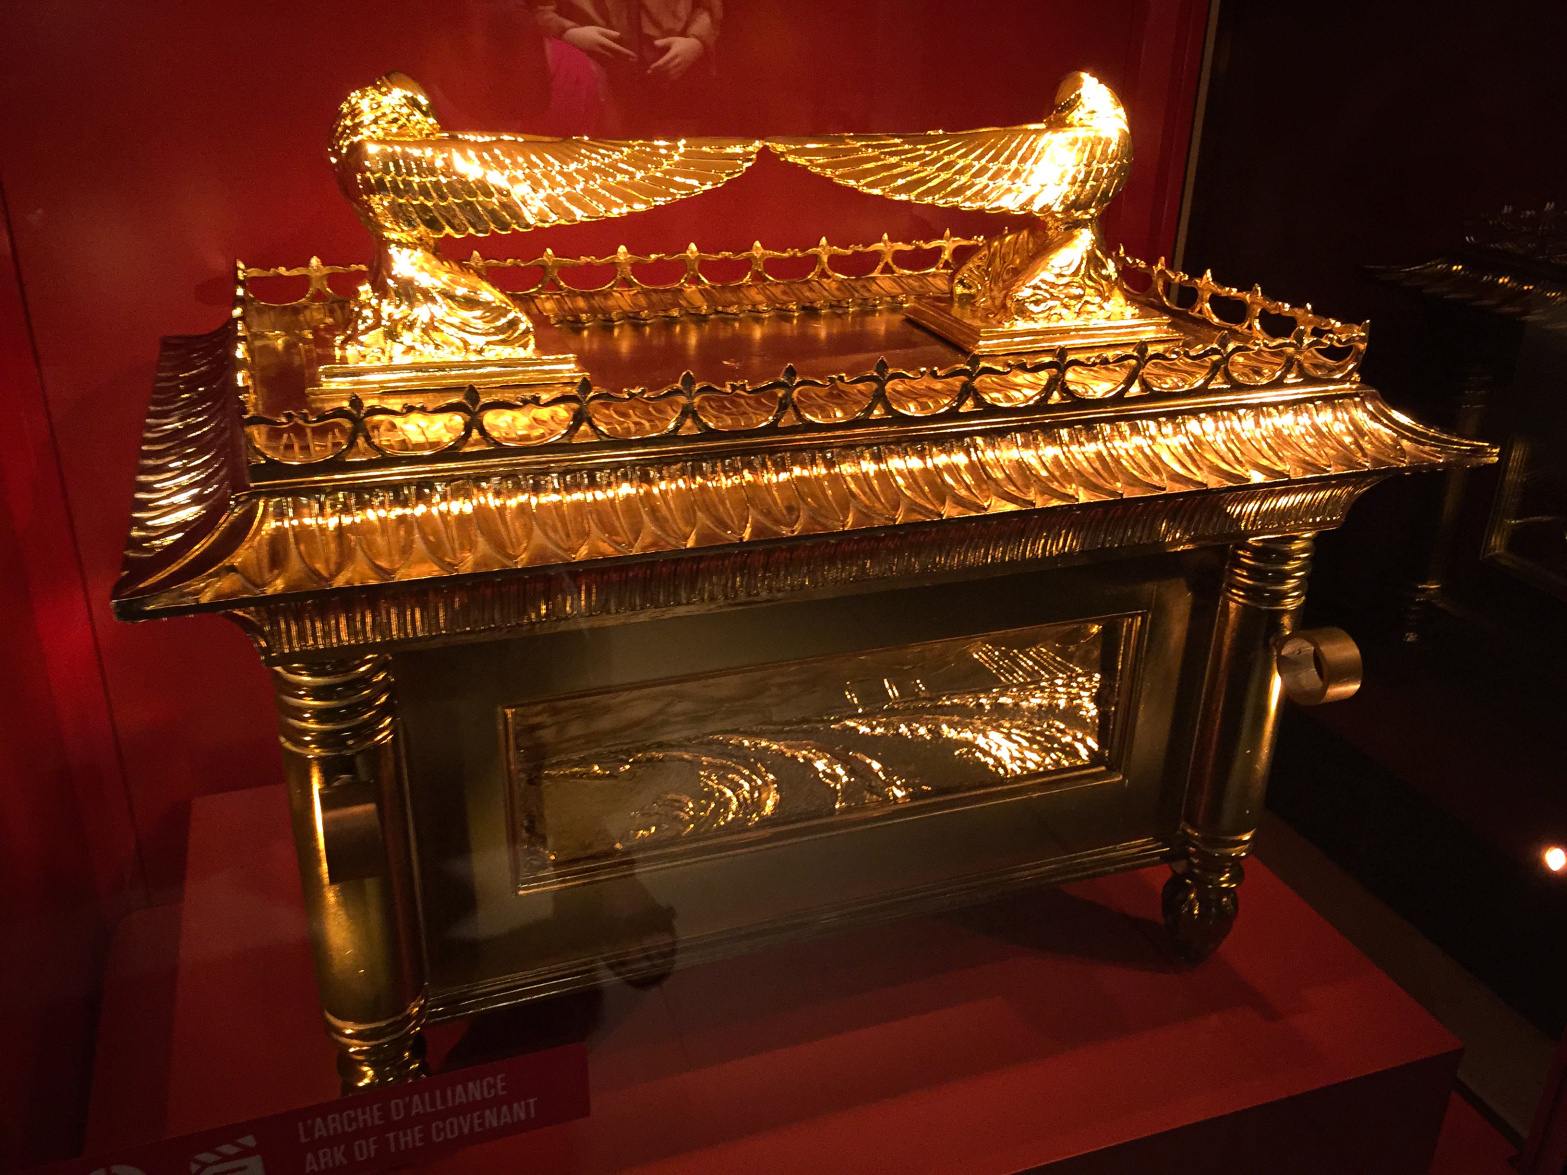 The ark of the covenant